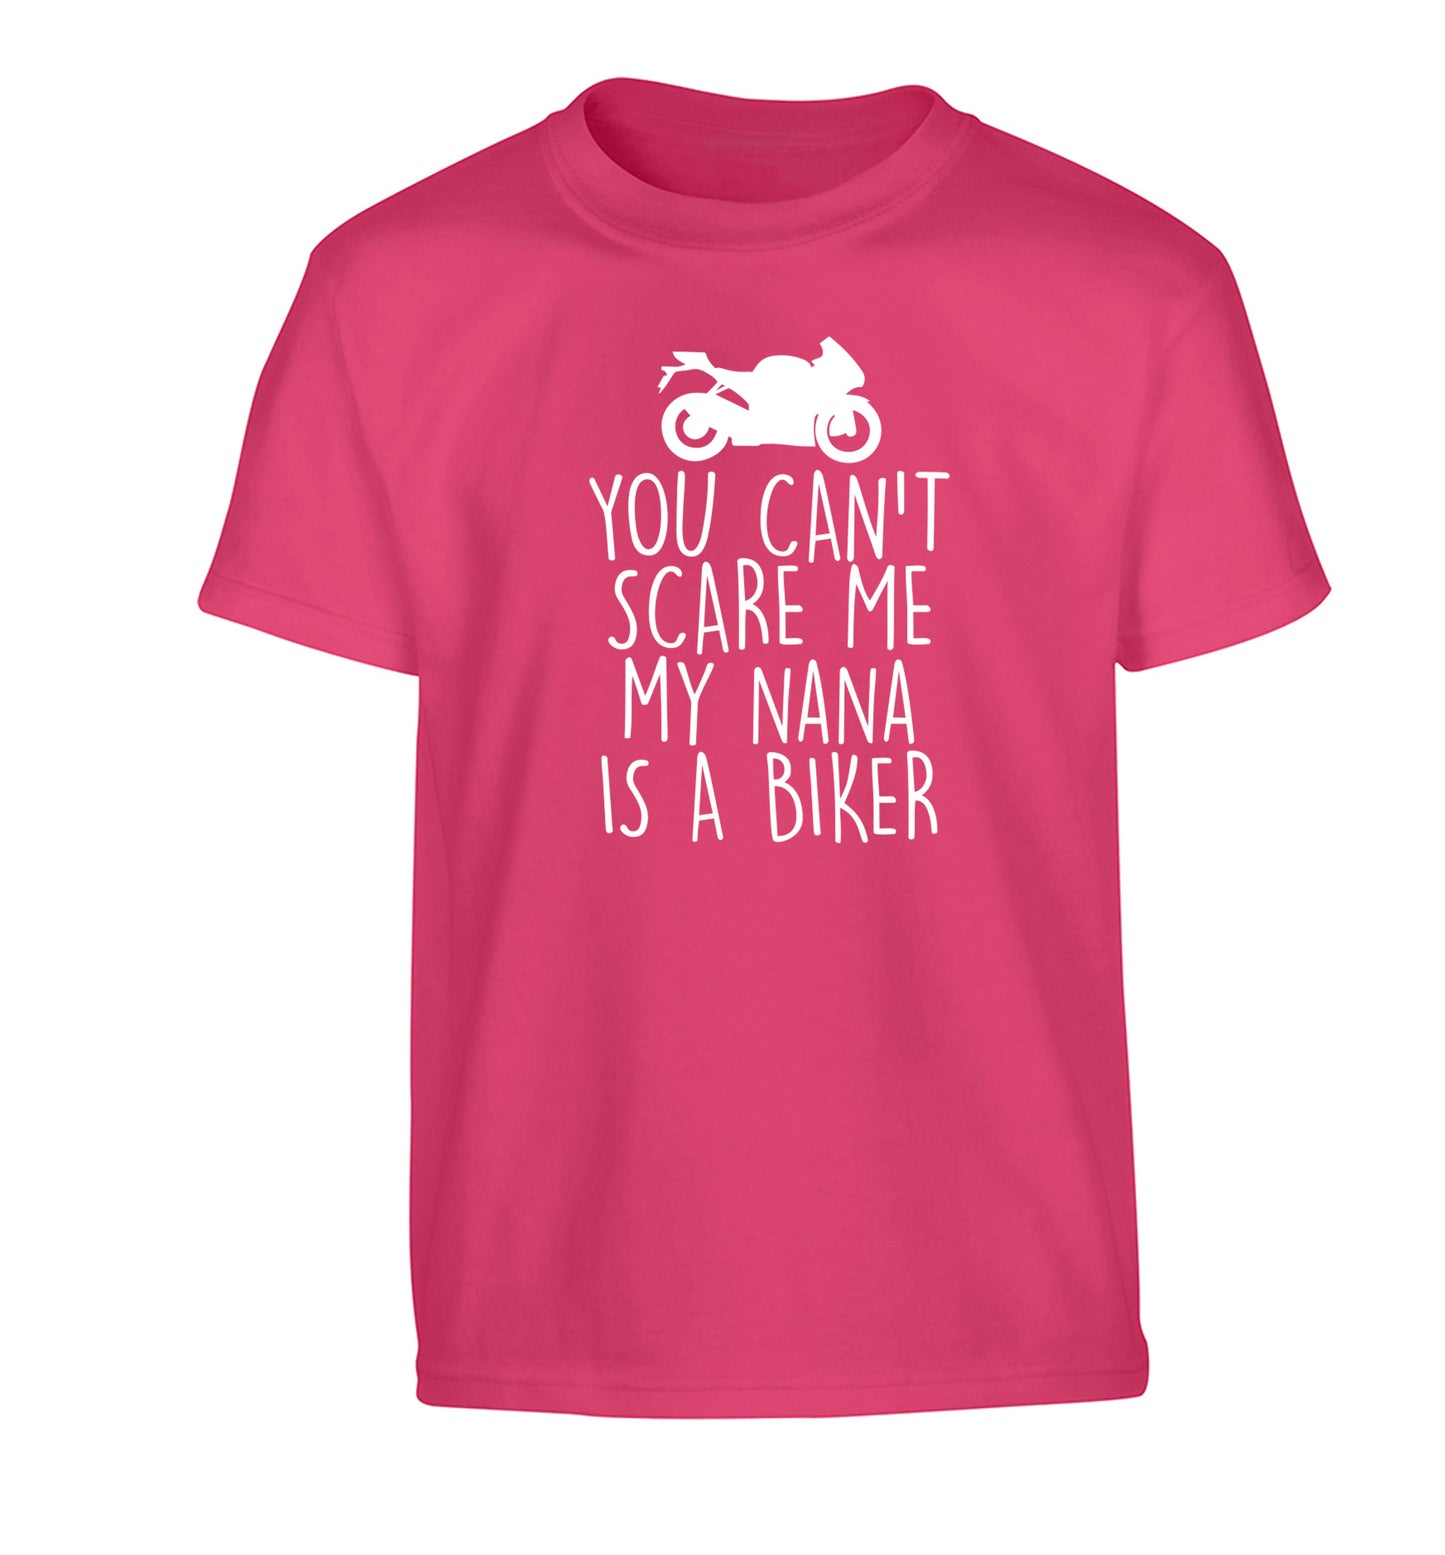 You can't scare me my nana is a biker Children's pink Tshirt 12-13 Years